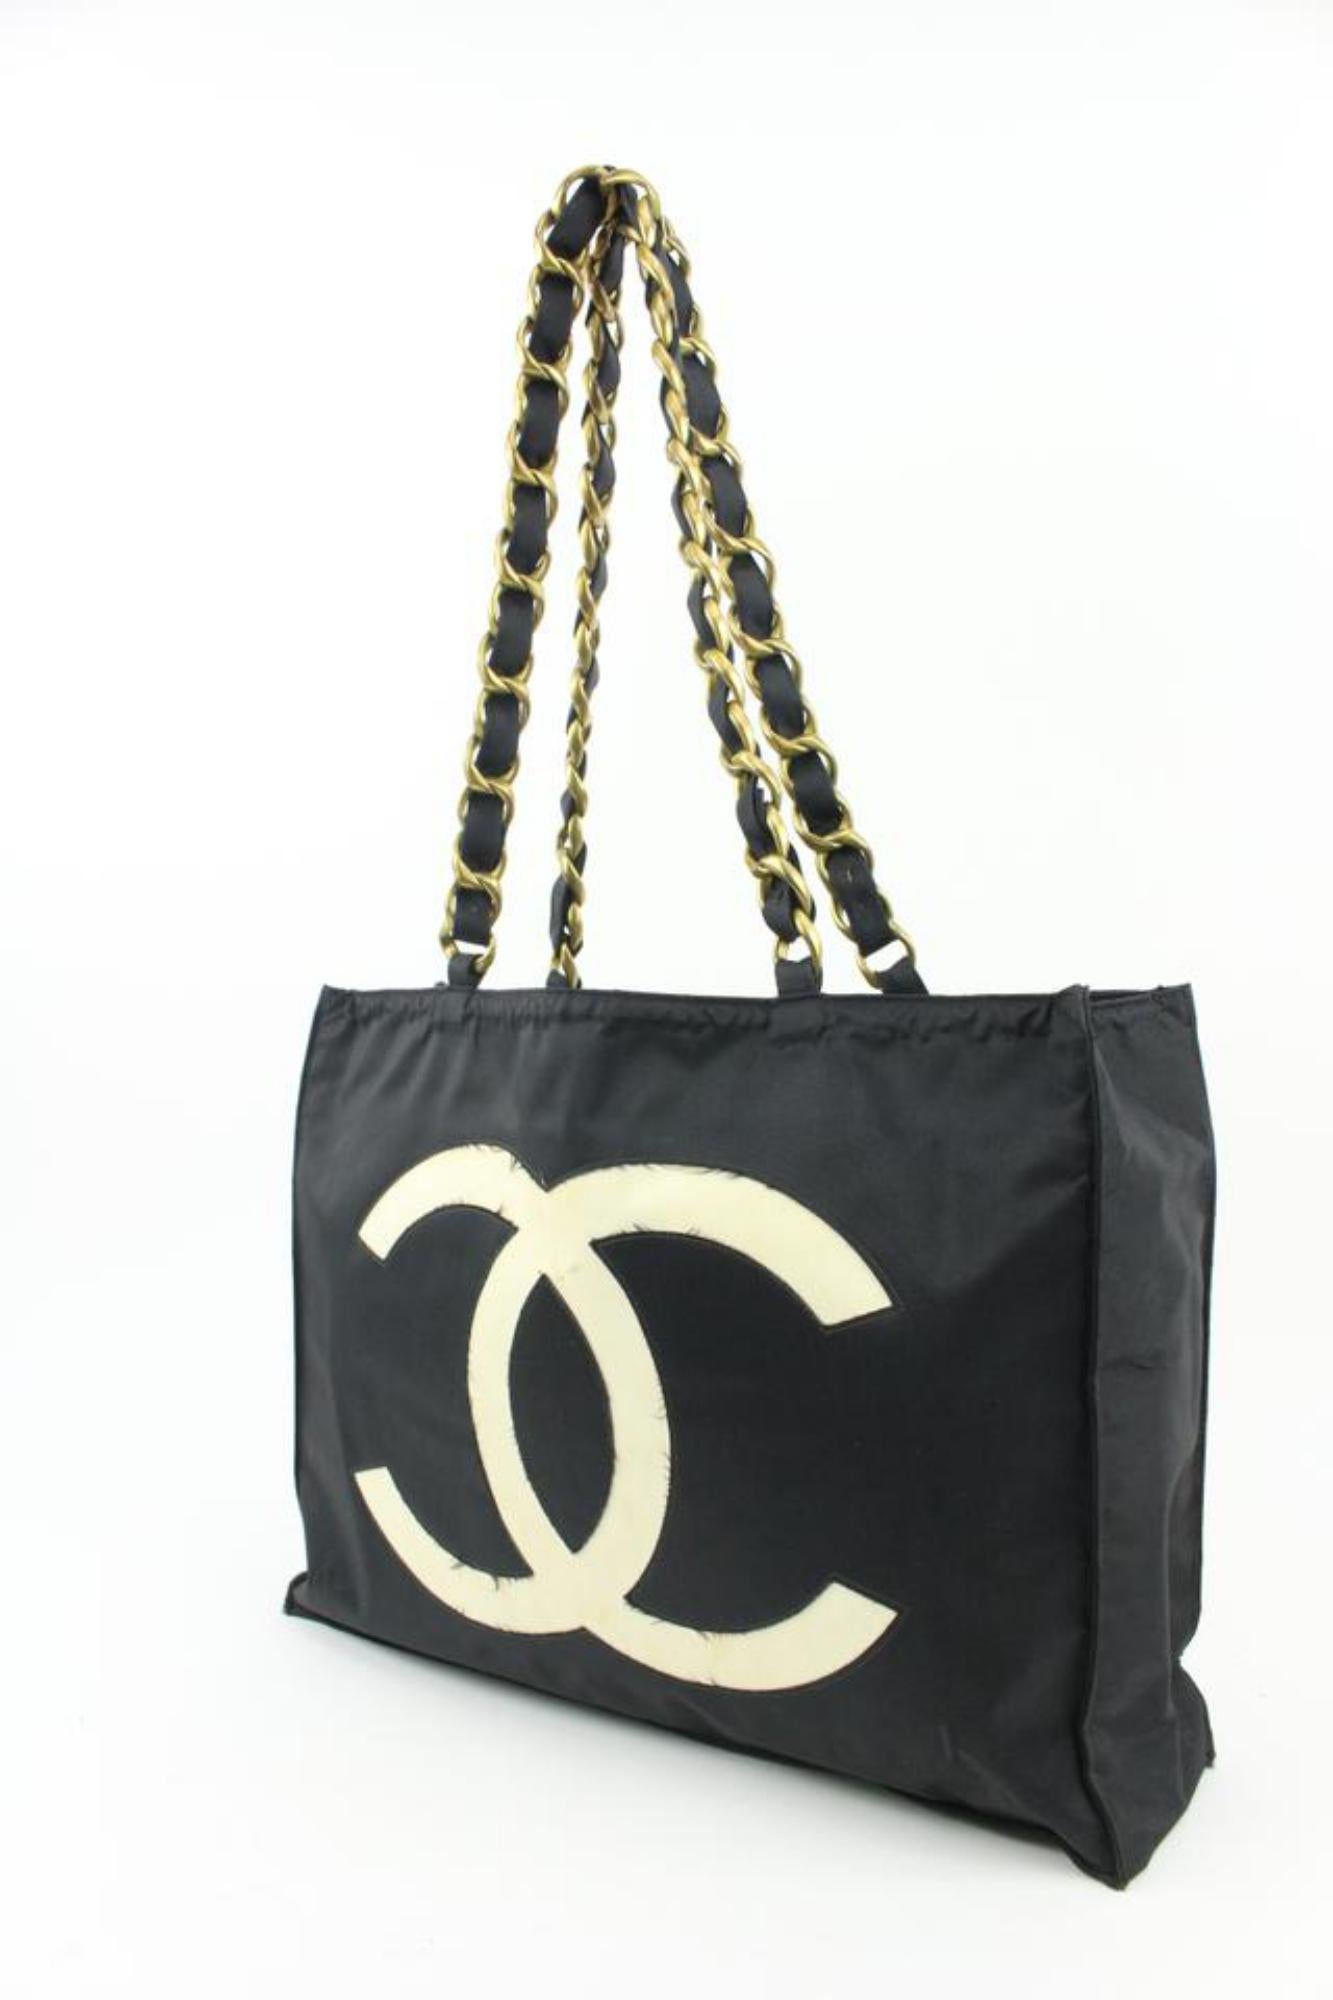 Chanel Black x White x Gold CC Logo Jumbo Shopper Tote 114ca6
Date Code/Serial Number: Rubbed Off
Made In: France
Measurements: Length:  16